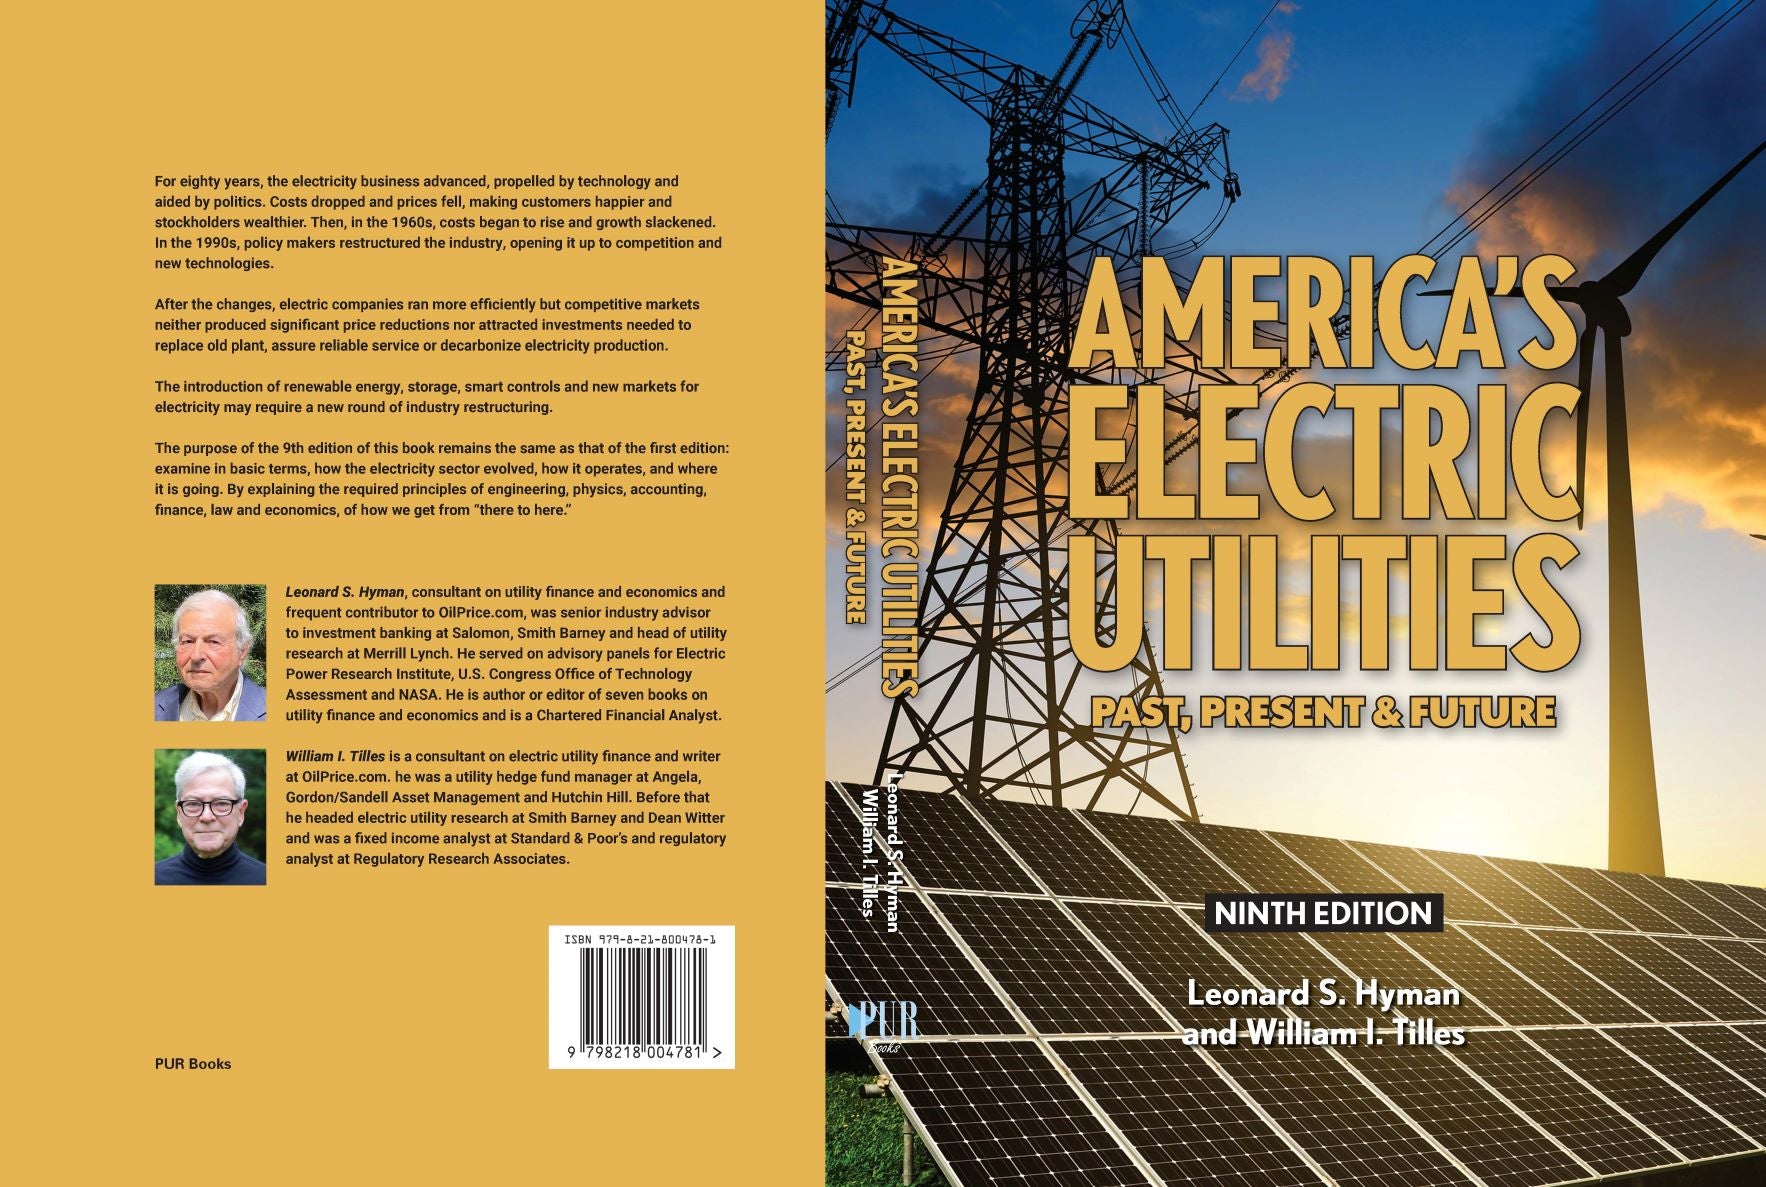 America's Electric Utilities: Past, Present, and Future (9th ed.)